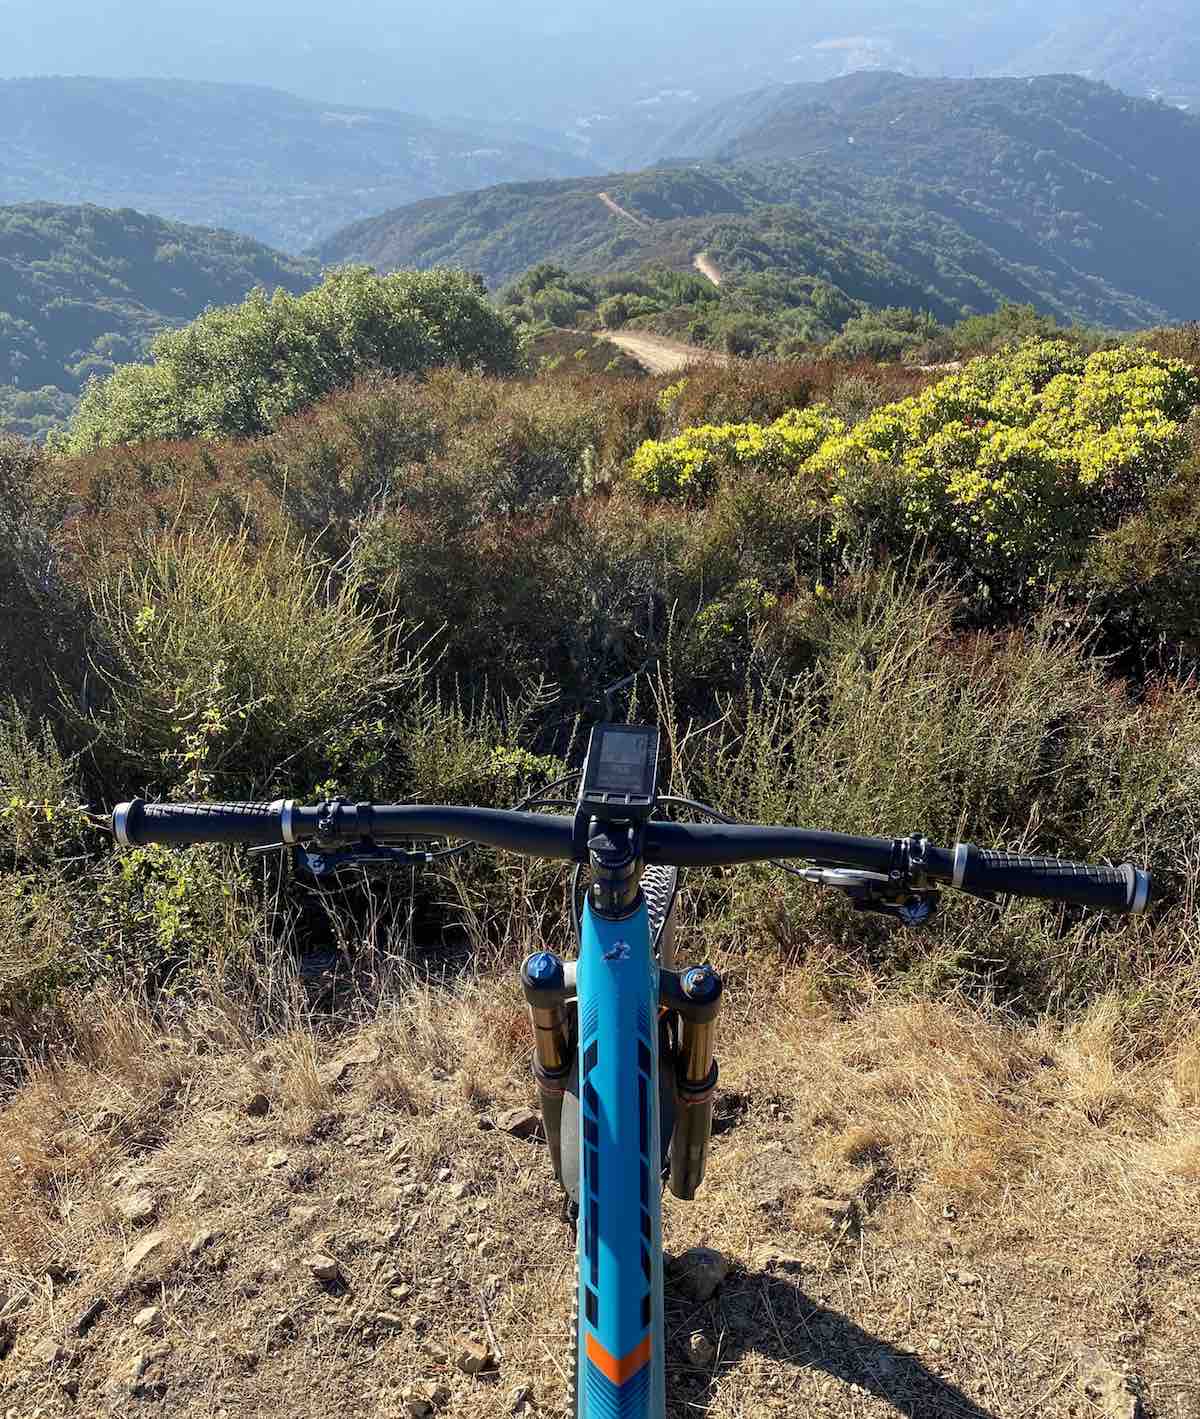 bikerumor pic of the day mountain bike looking out over the hills of the Sierra Azul open space preserve at the top of priest rock trail in los gatos california.